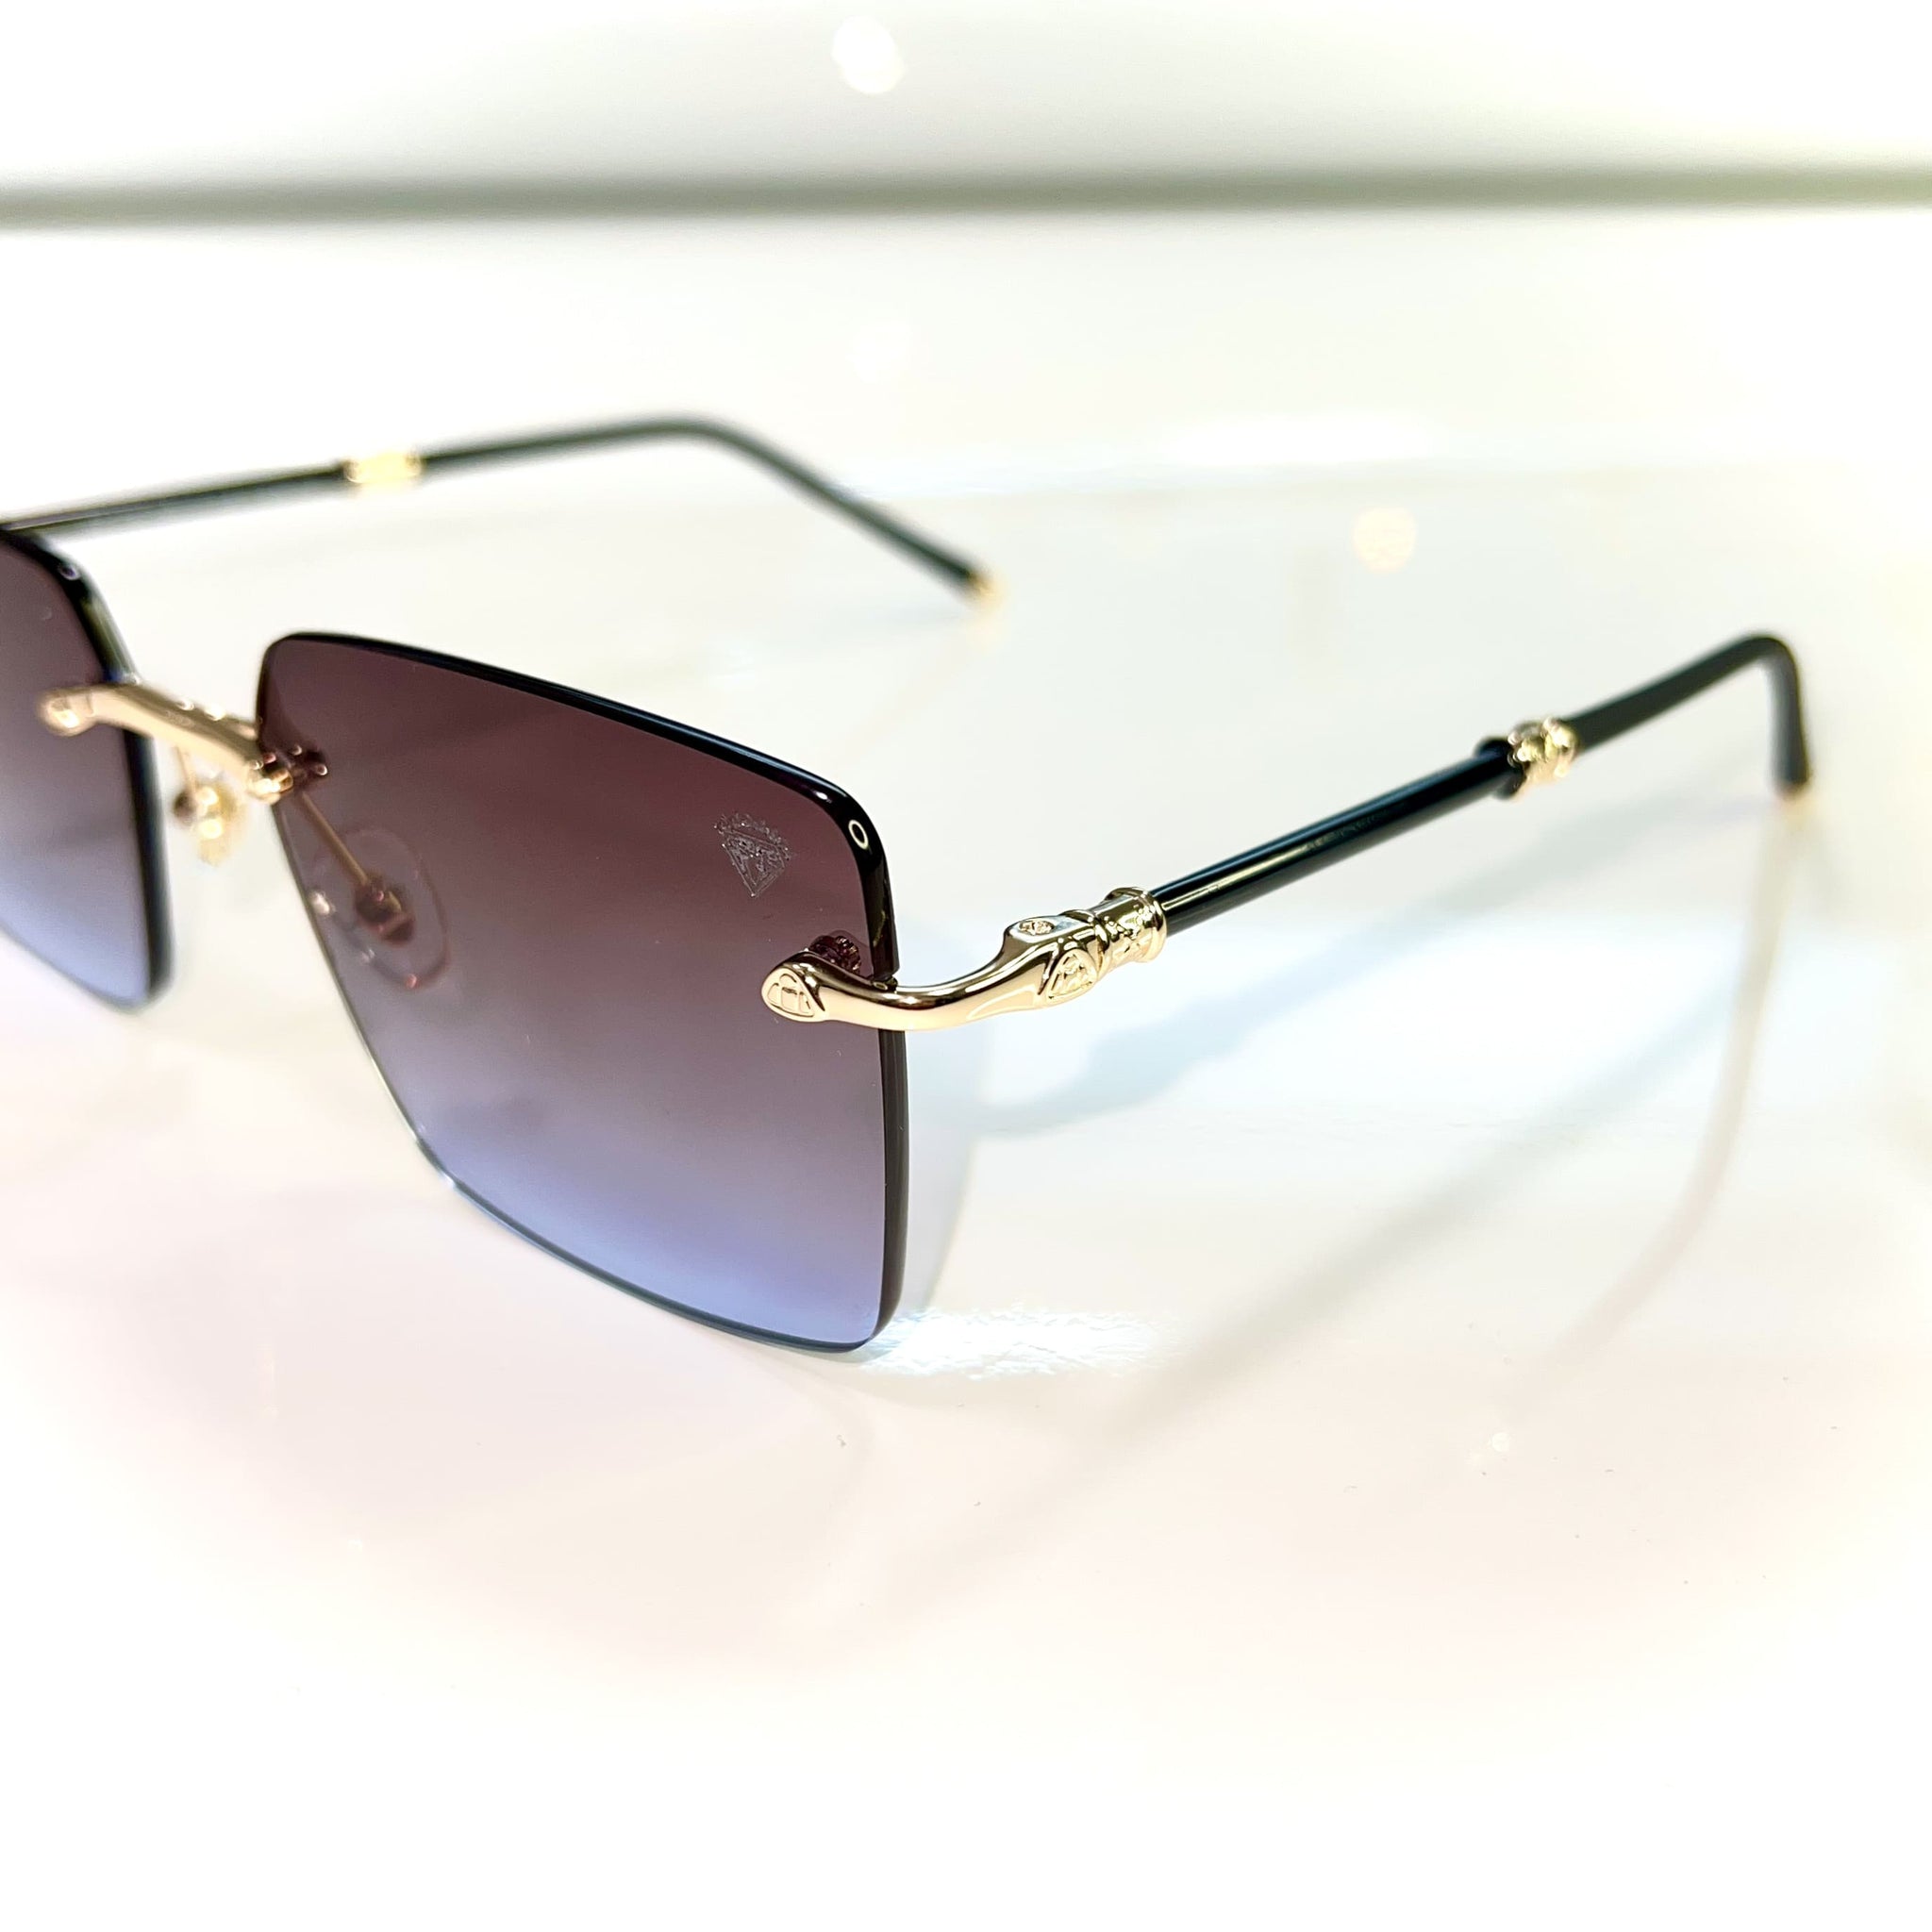 Eduardo Glasses - 14k gold plated + Silicon side - Brown/Blue Shade - Sehgal Glasses